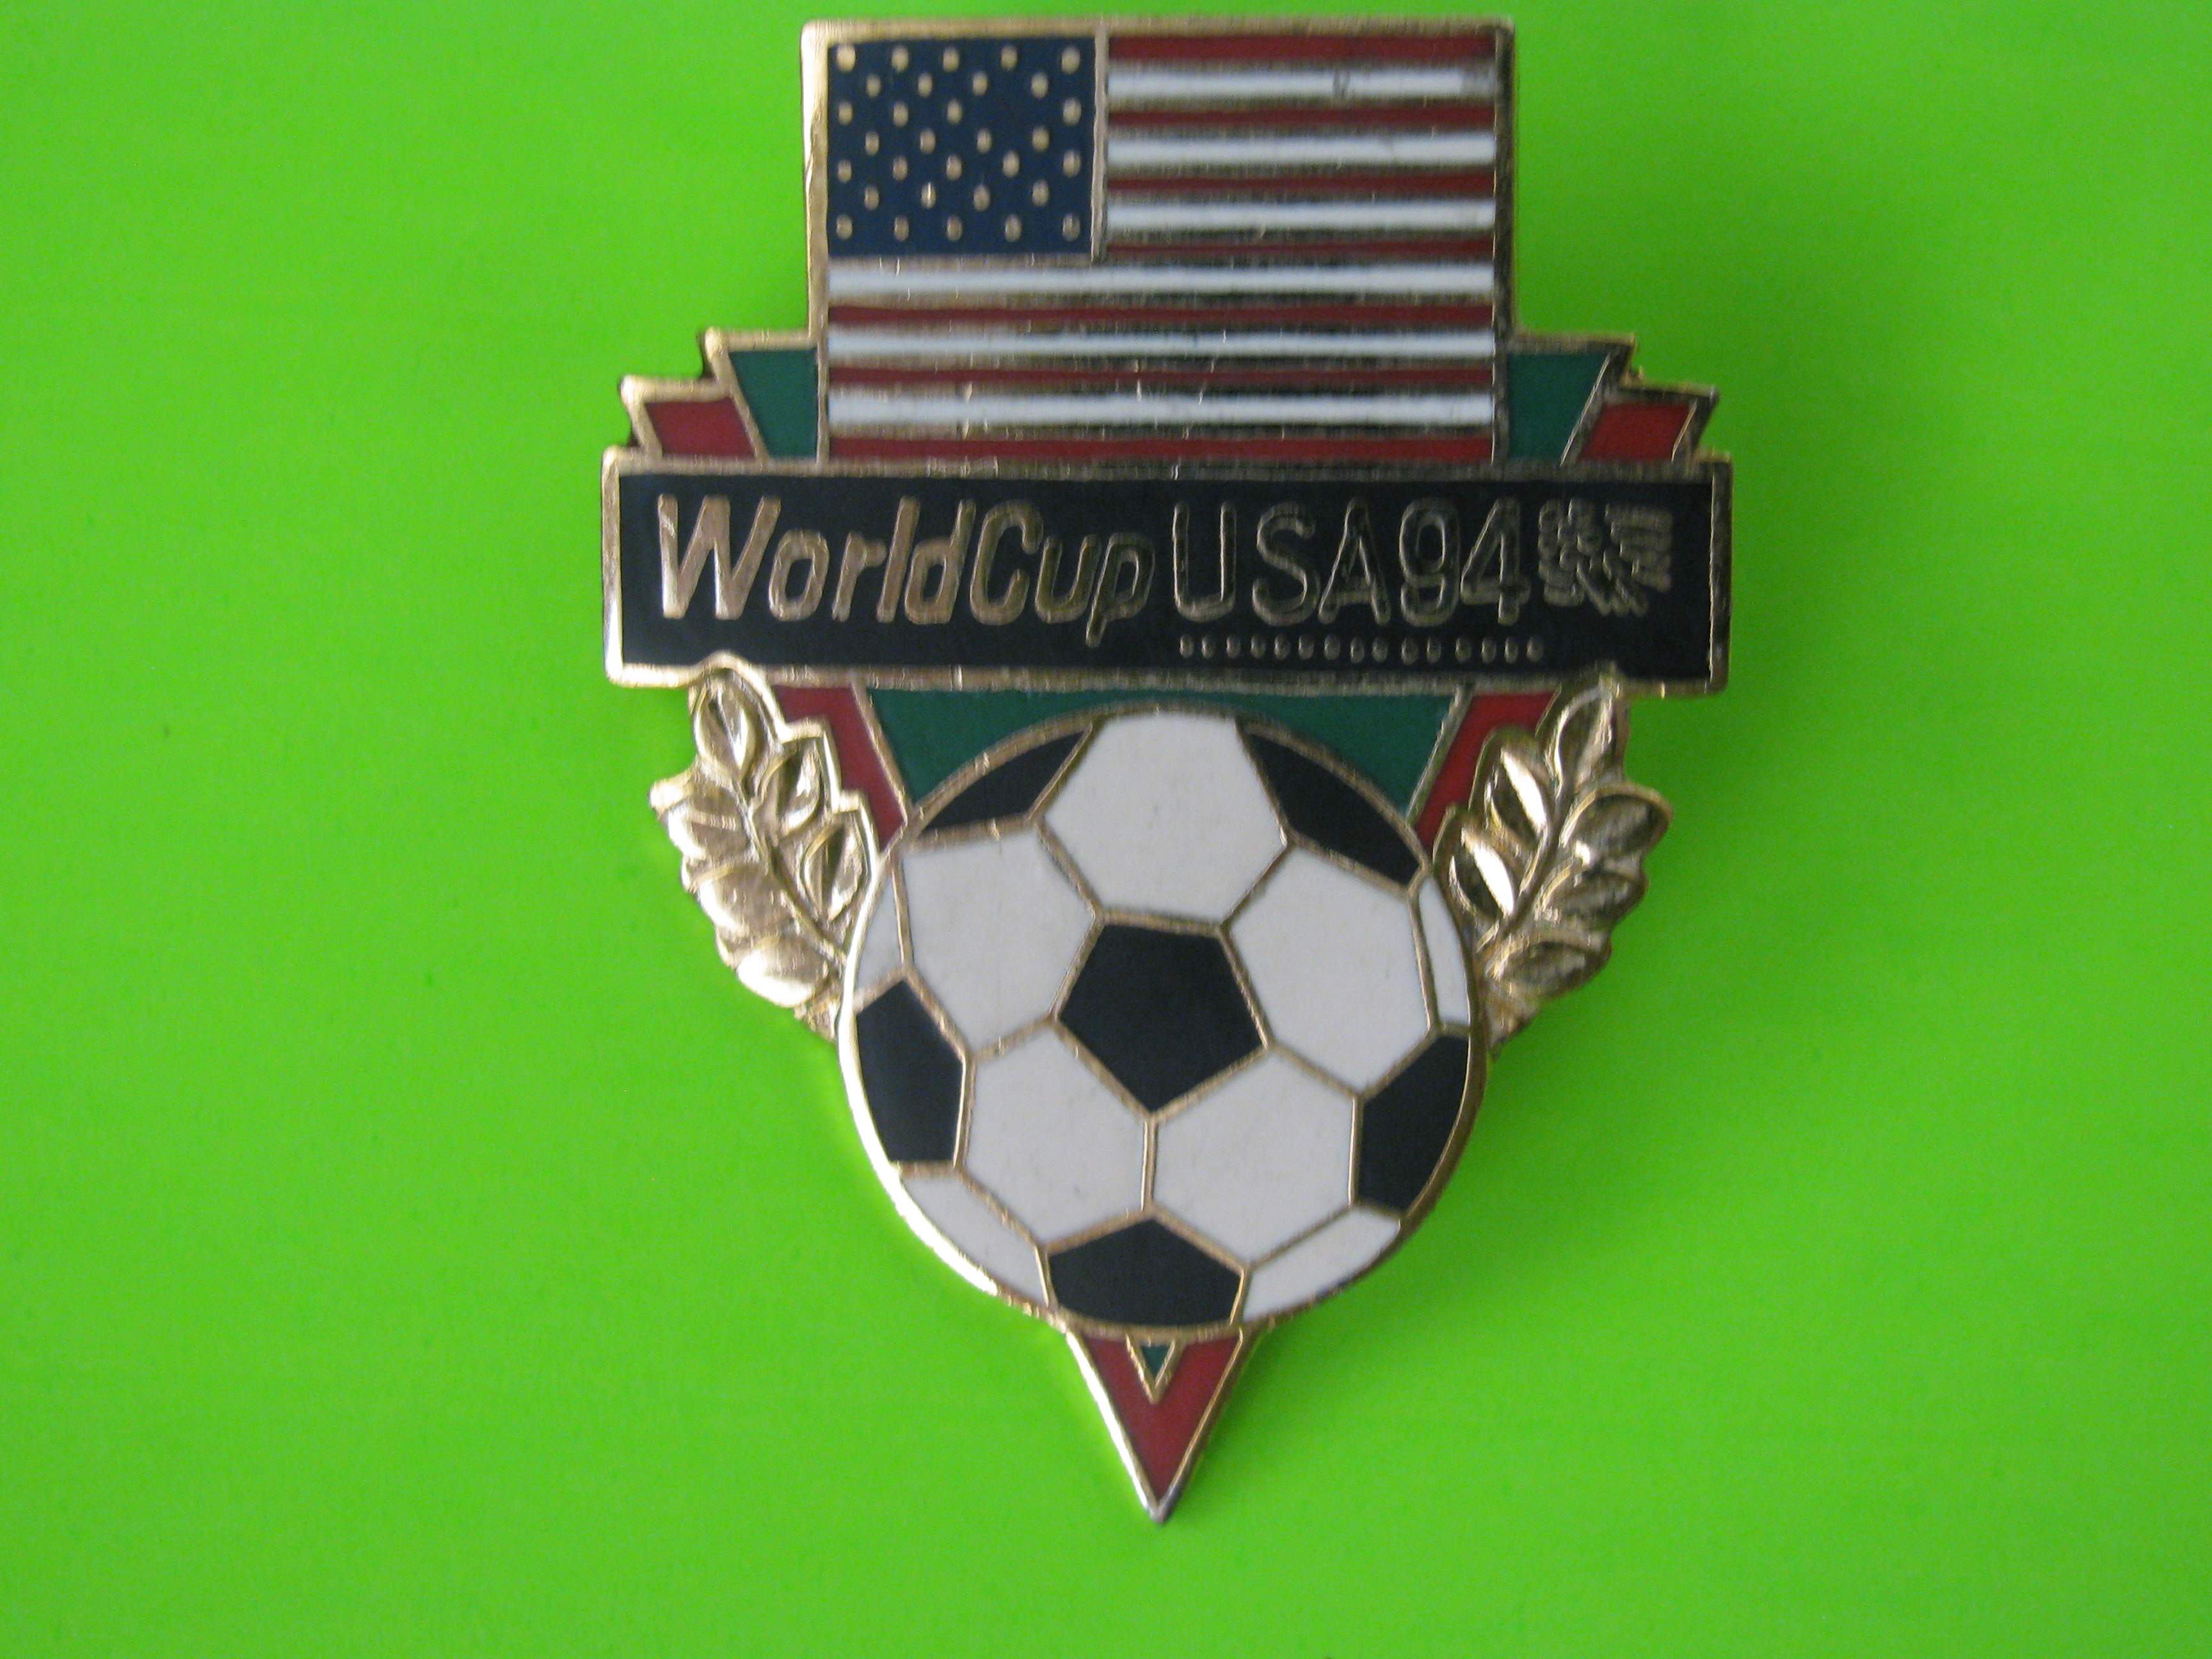 1994 World Cup USA Large Team USA Soccer Pin with Butterfly Clutch